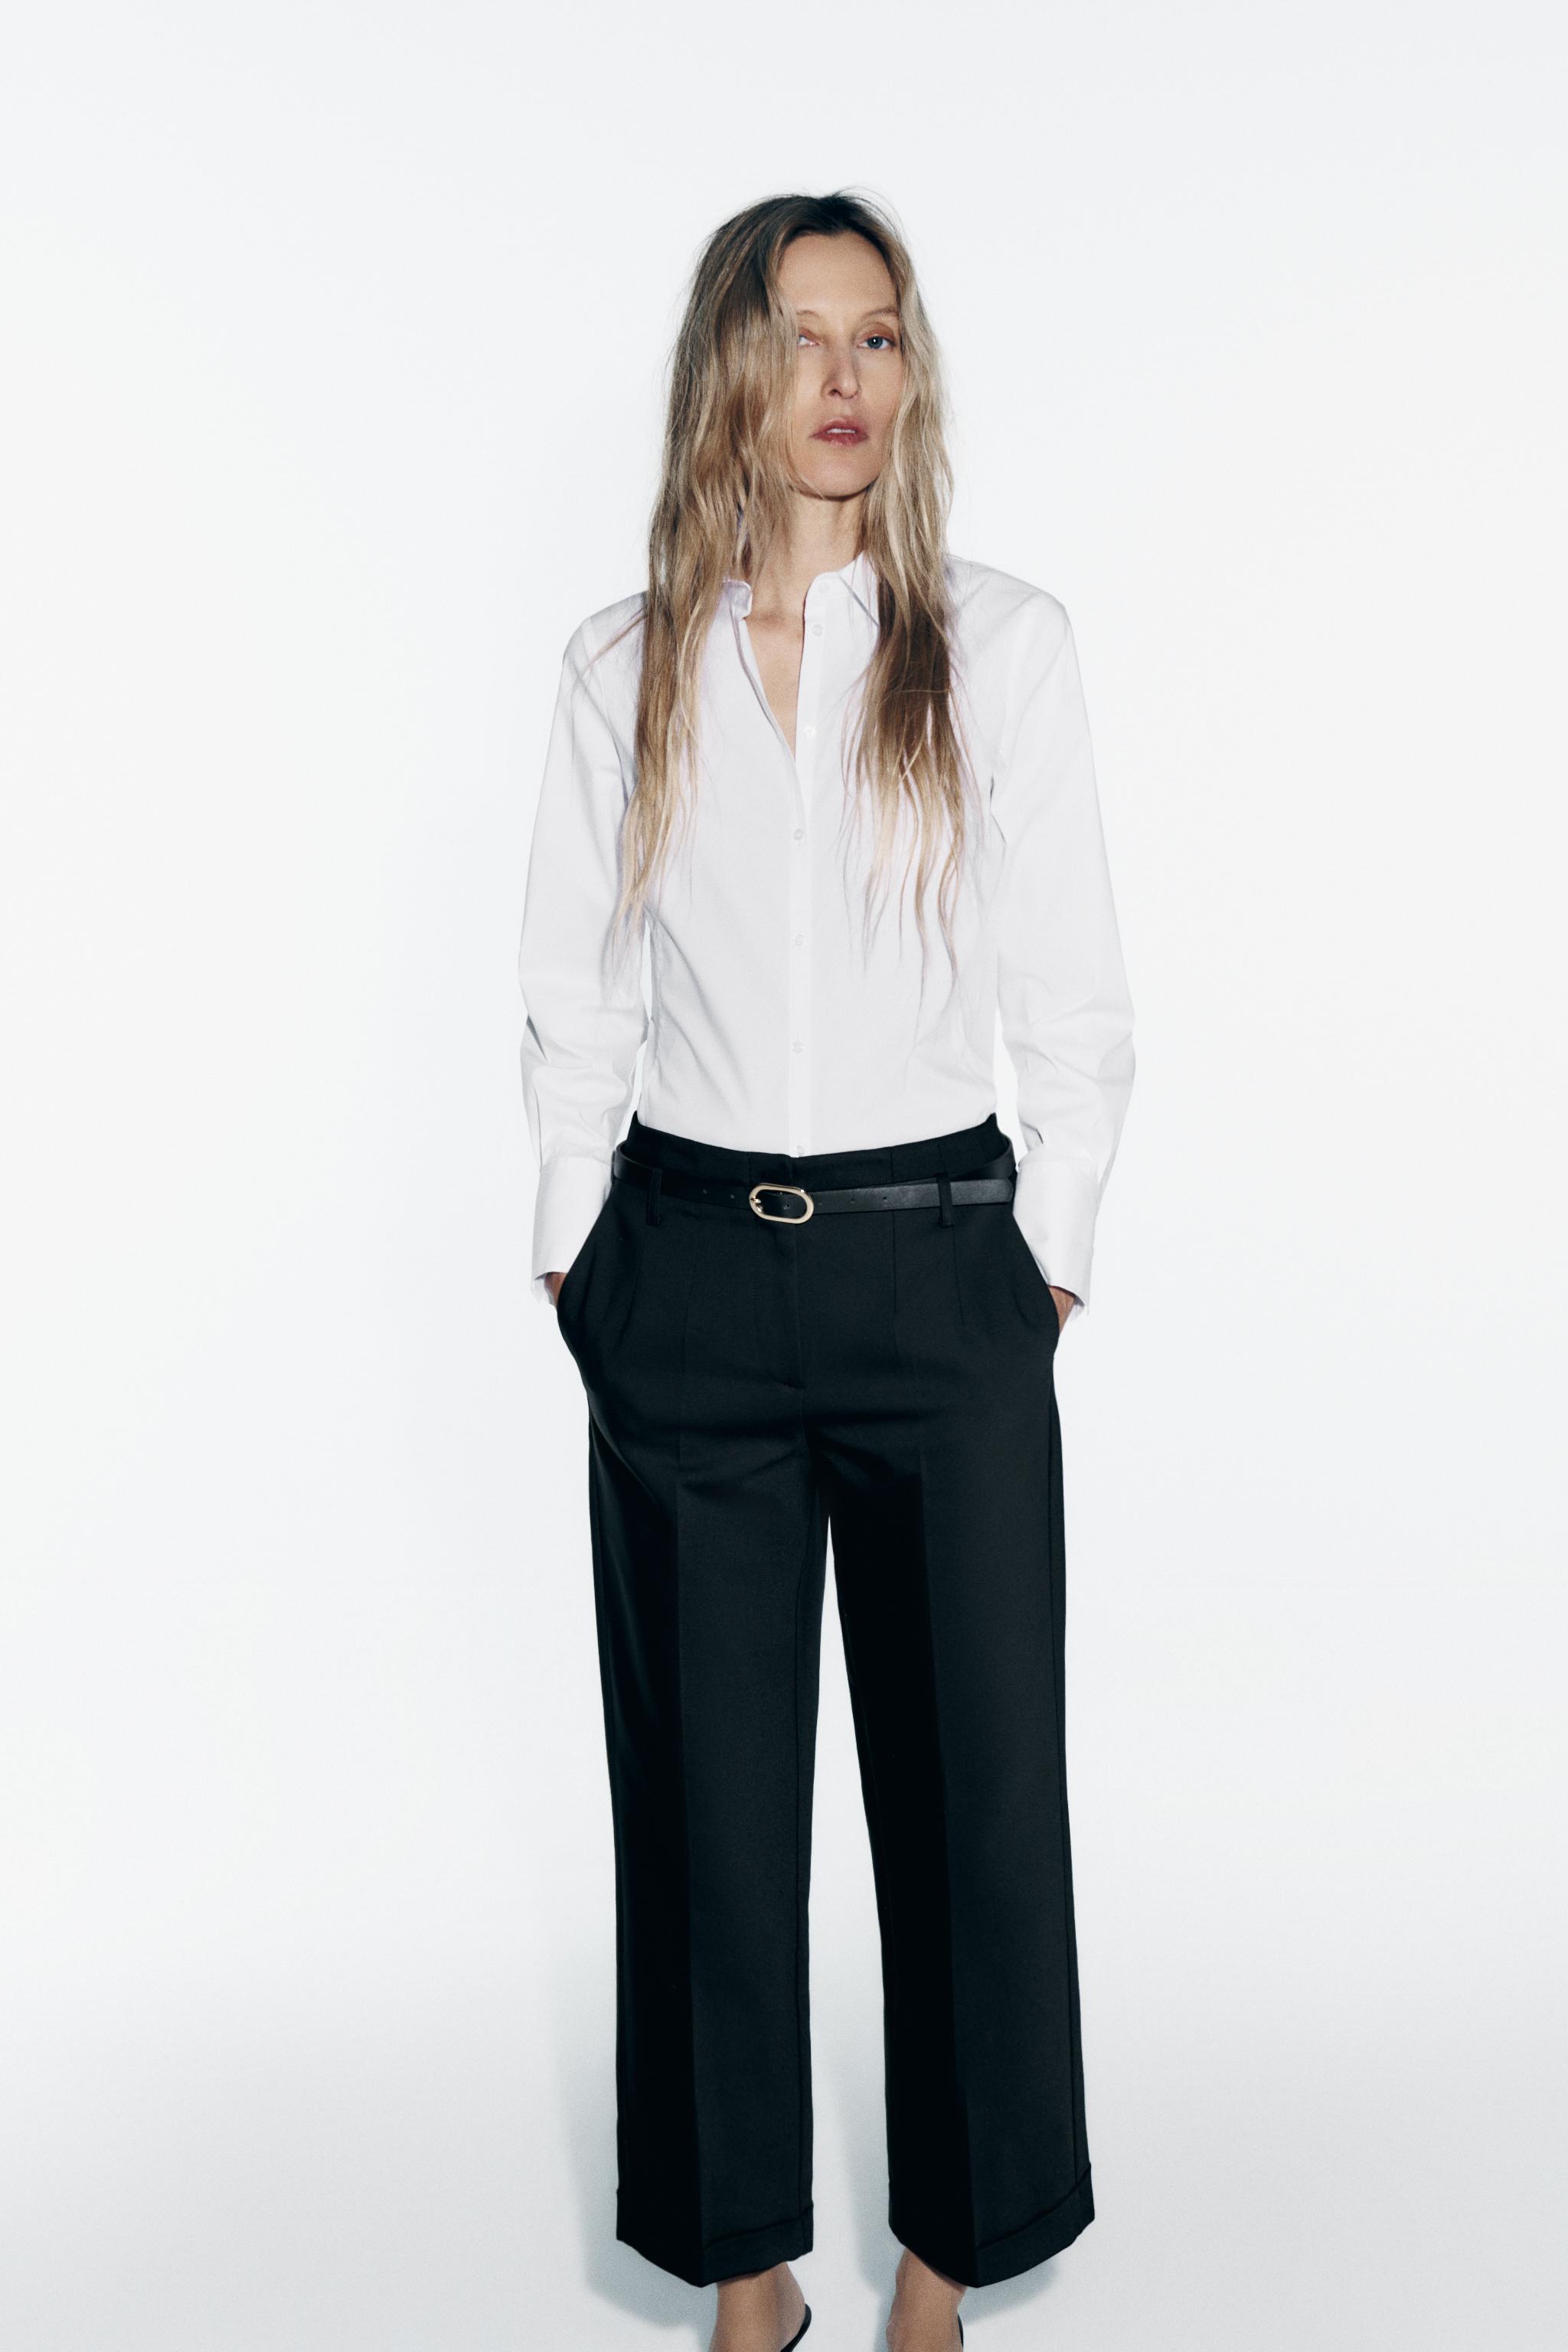 ZARA High Waisted Belted Trousers Buttoned Pants with Belt Medium 